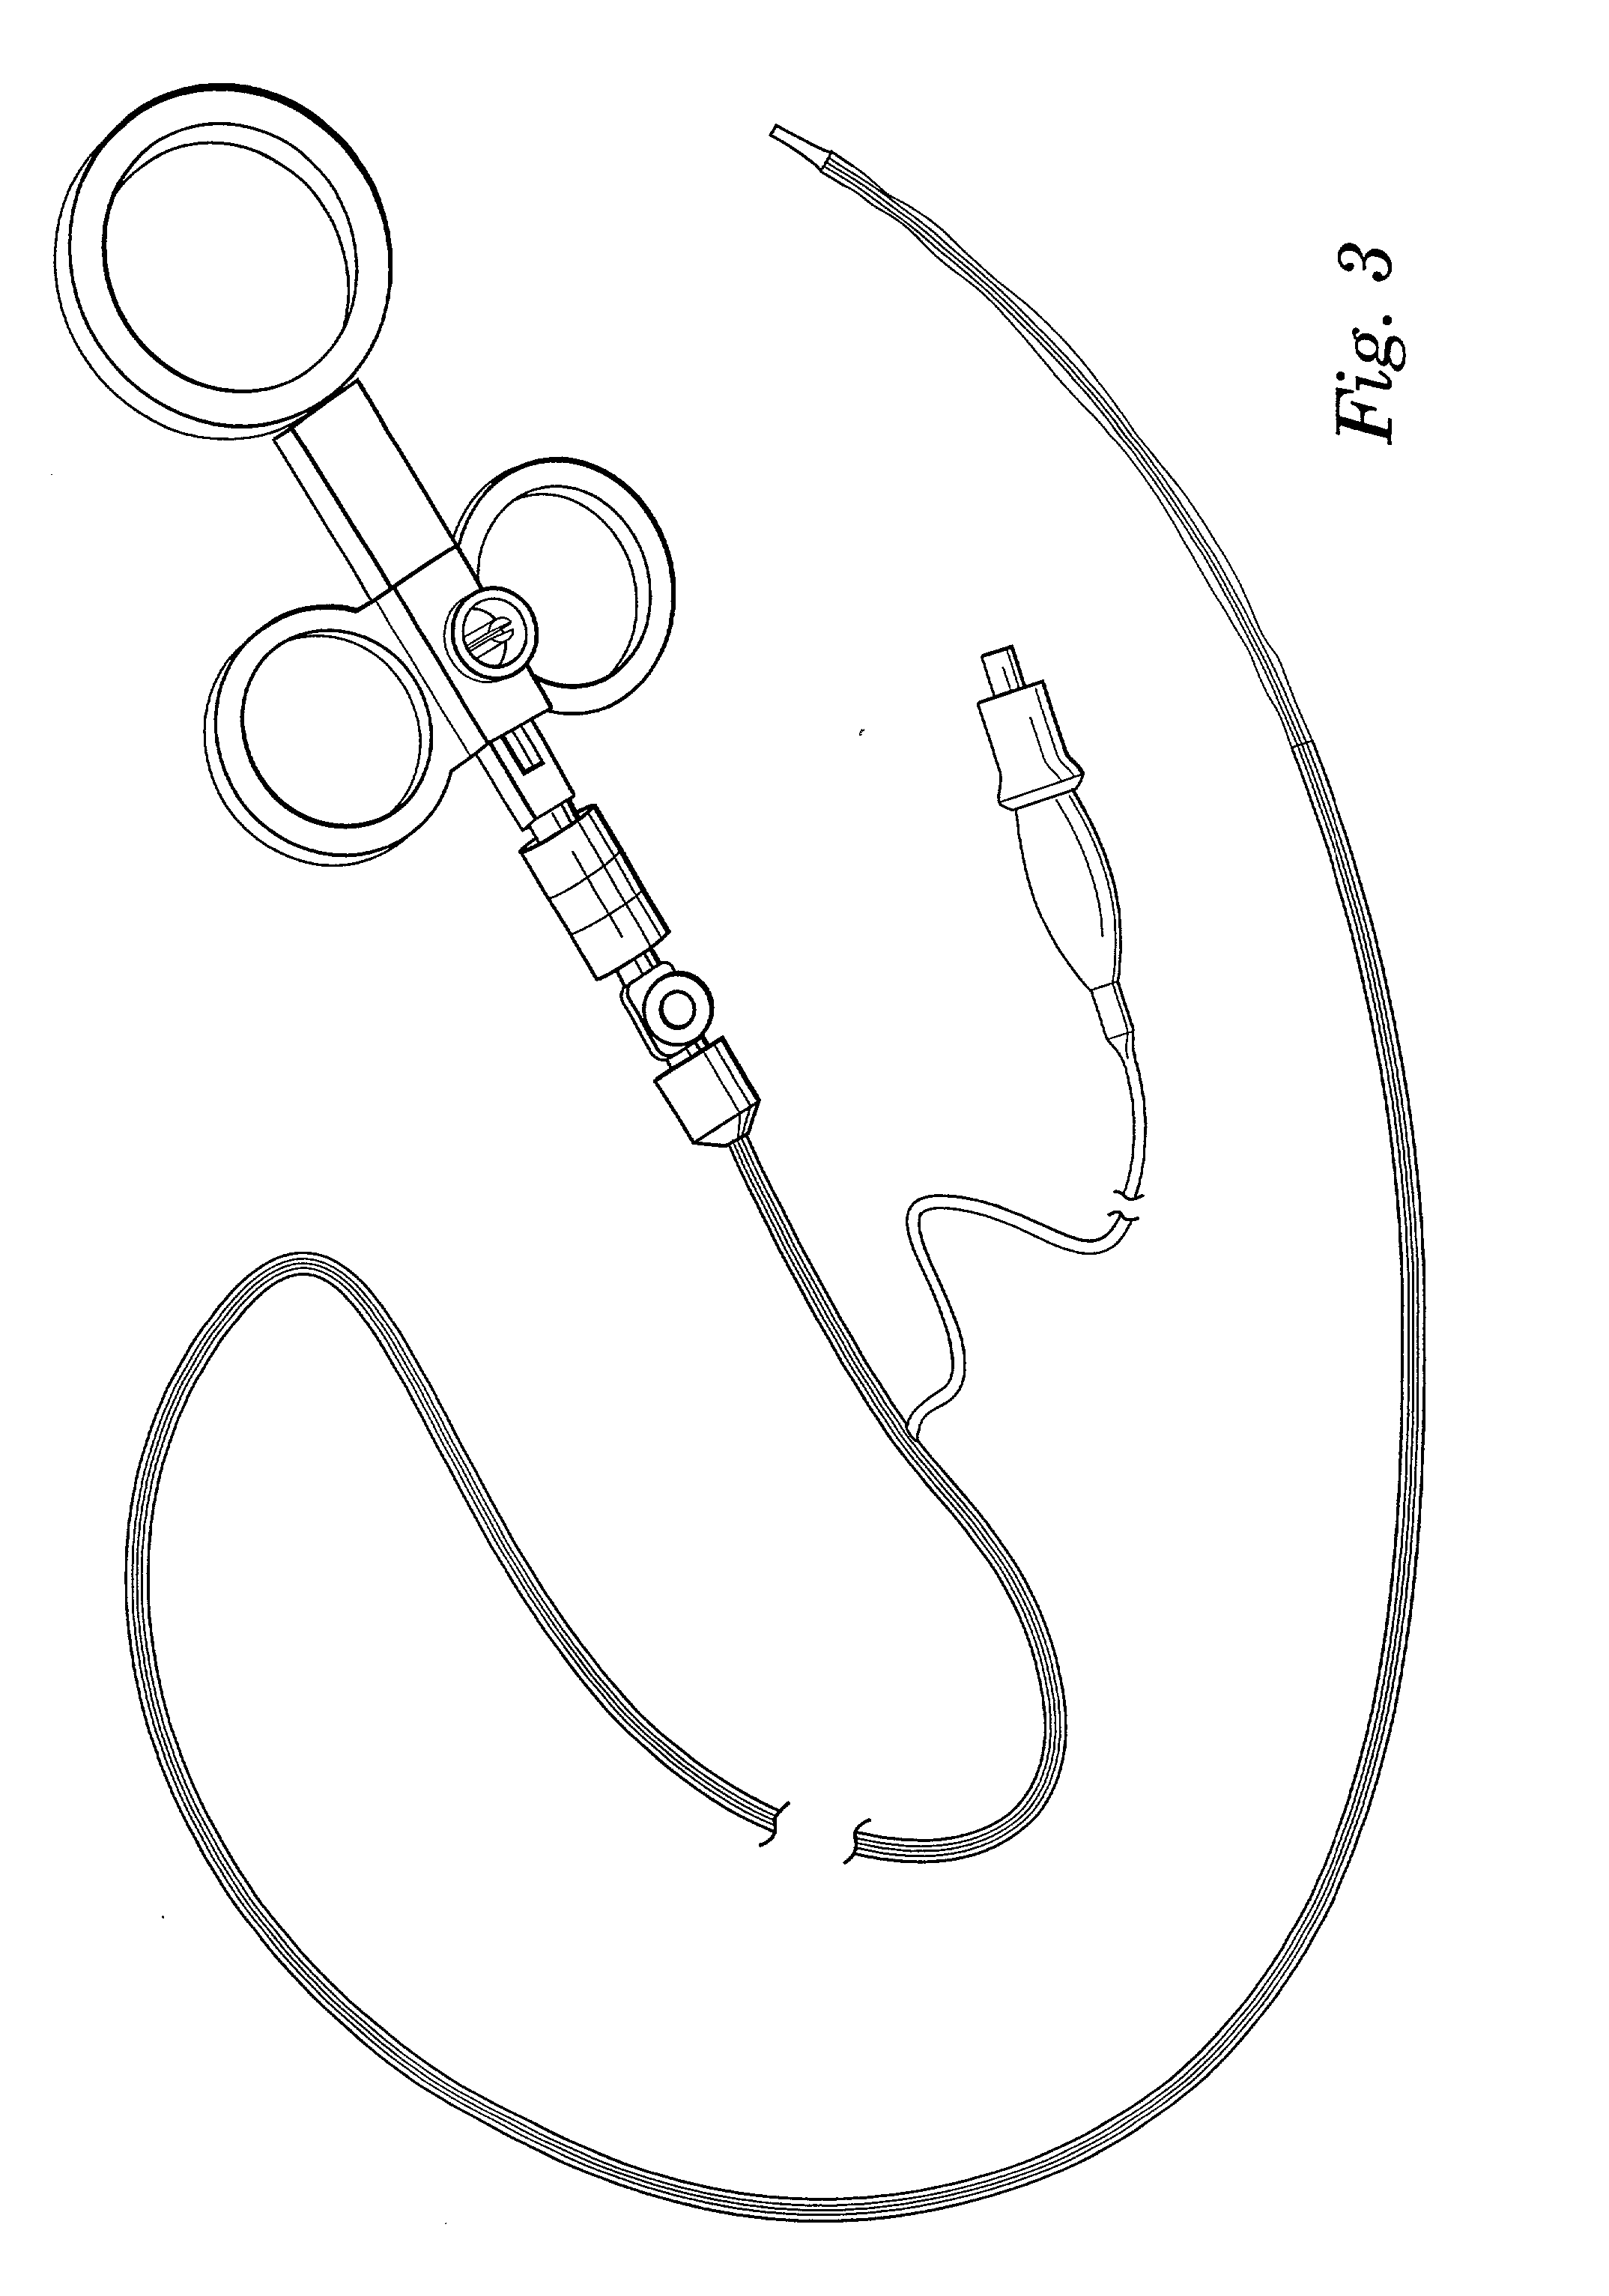 Methods and devices for diagnostic and therapeutic interventions in the peritoneal cavity